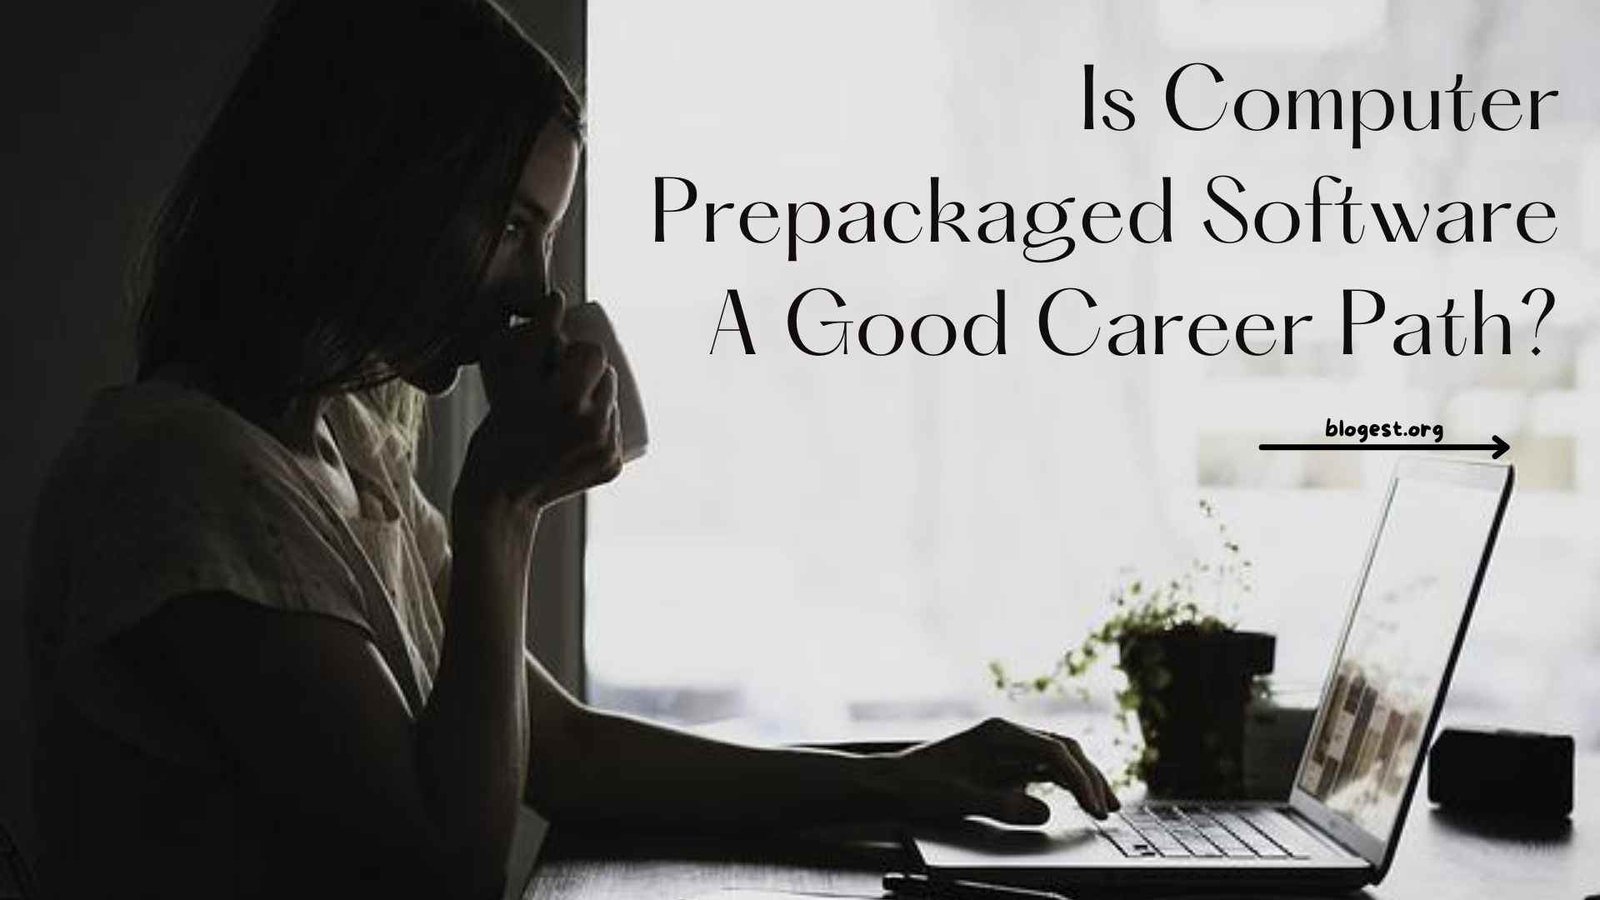 Is Computer Prepackaged Software A Good Career Path?